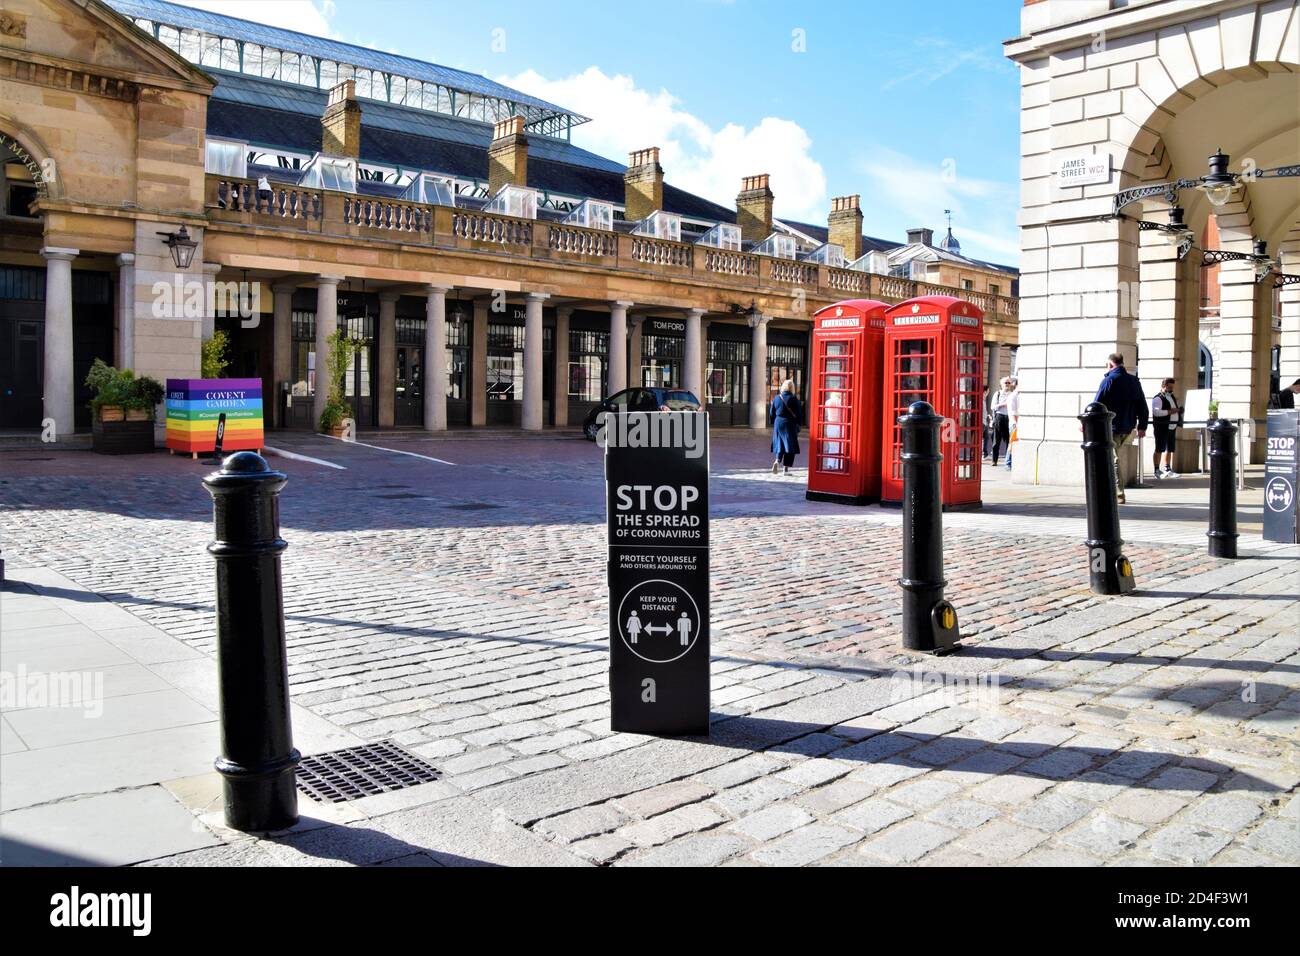 Stop The Spread Of Coronavirus social distancing street sign in Covent Garden, London 2020 Stock Photo